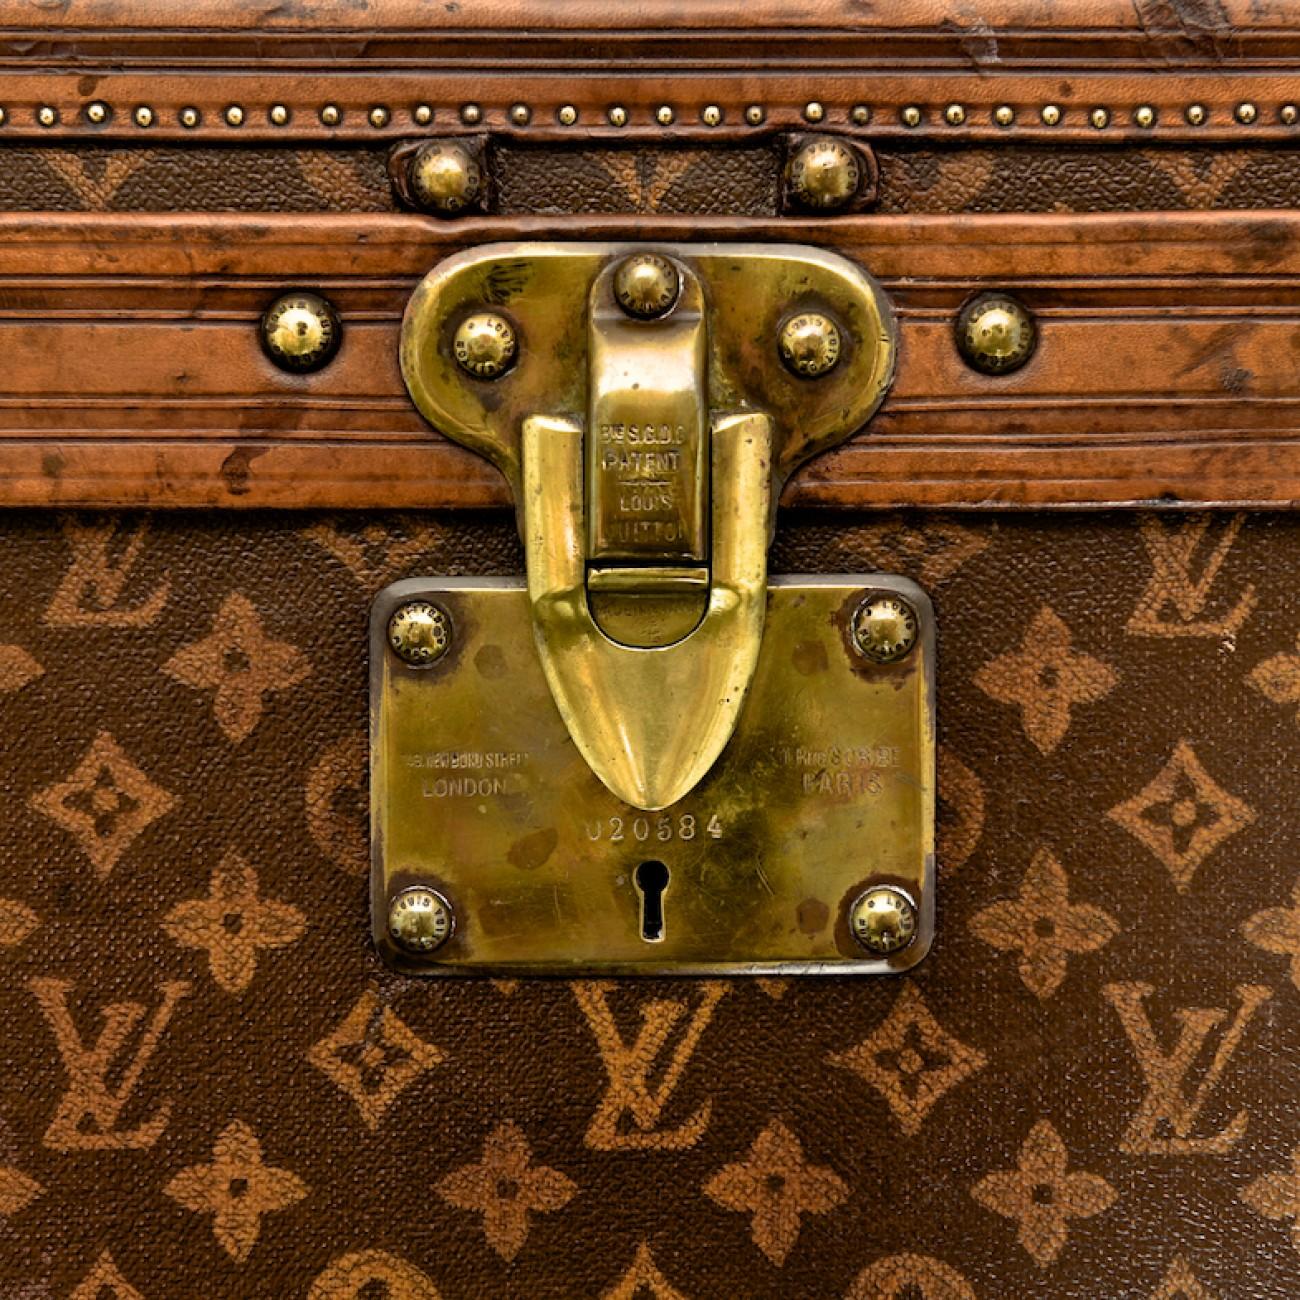 8 Things You Didn't Know About Louis Vuitton, the Man